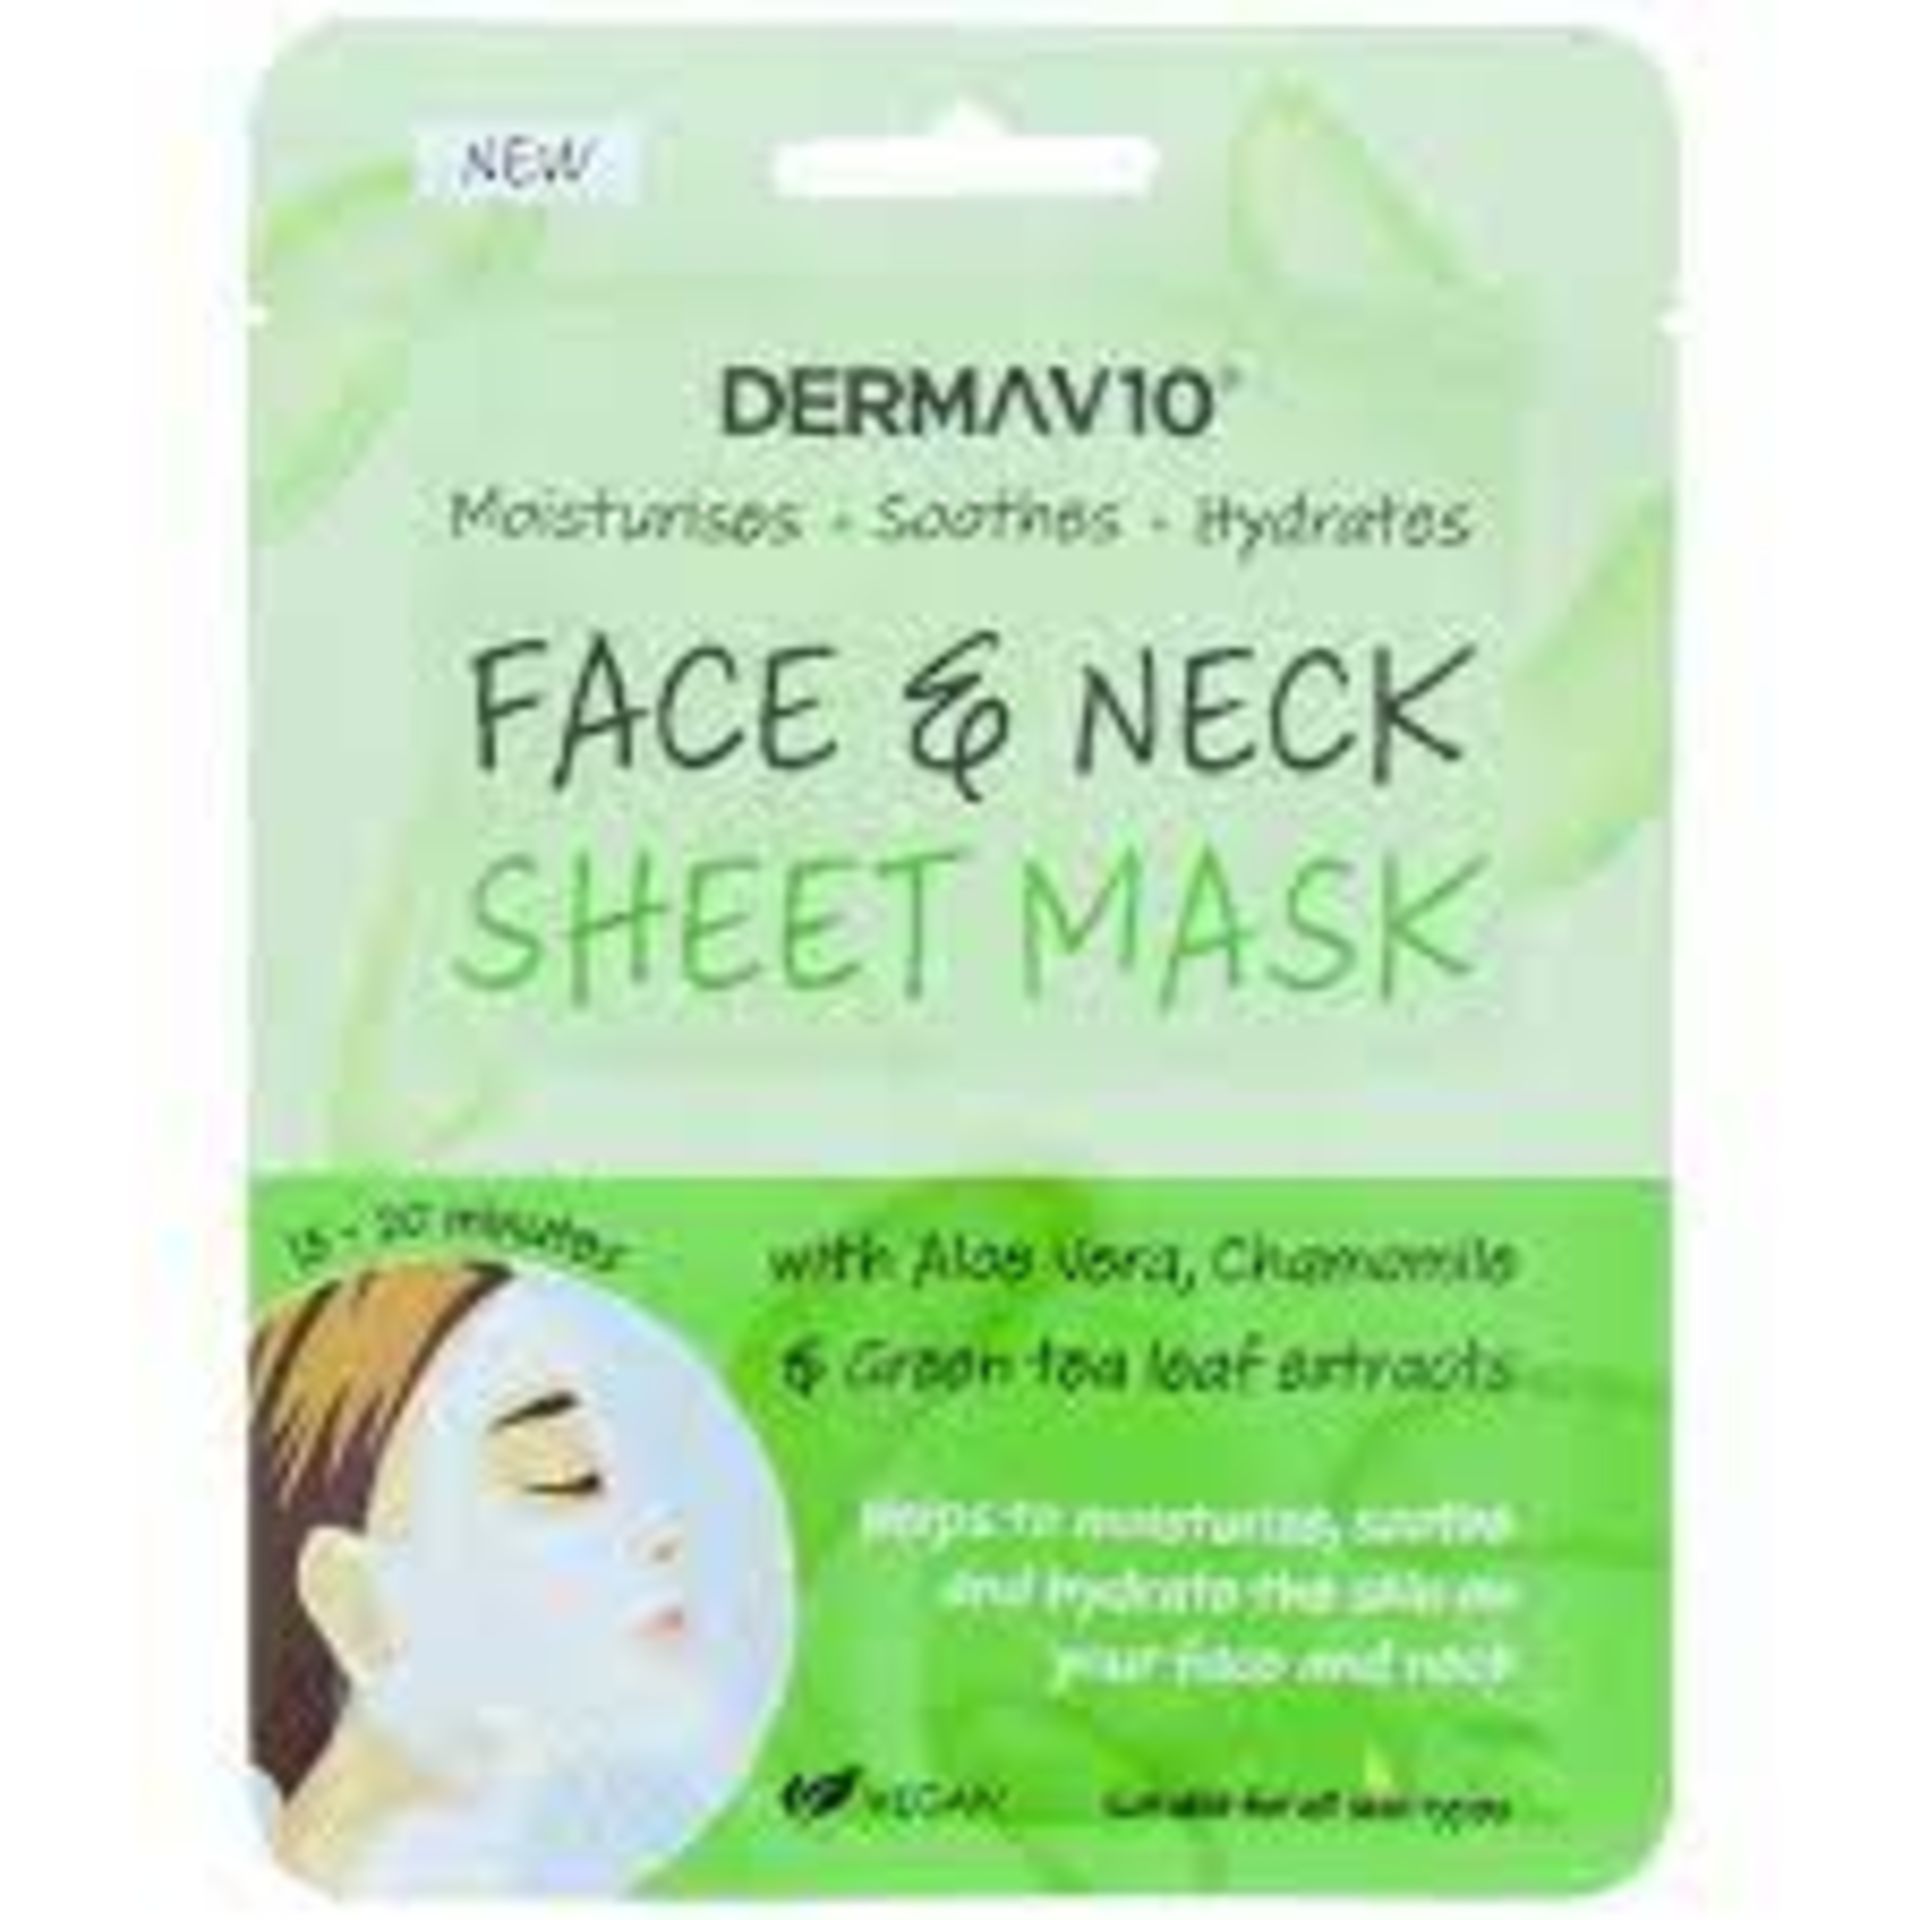 96 x NEW PACKAGED DERMAV10 FACE NECK SHEET MASKS. MOISTURISES, SOOTHES, HYDRATES. WITH ALOE VERA,